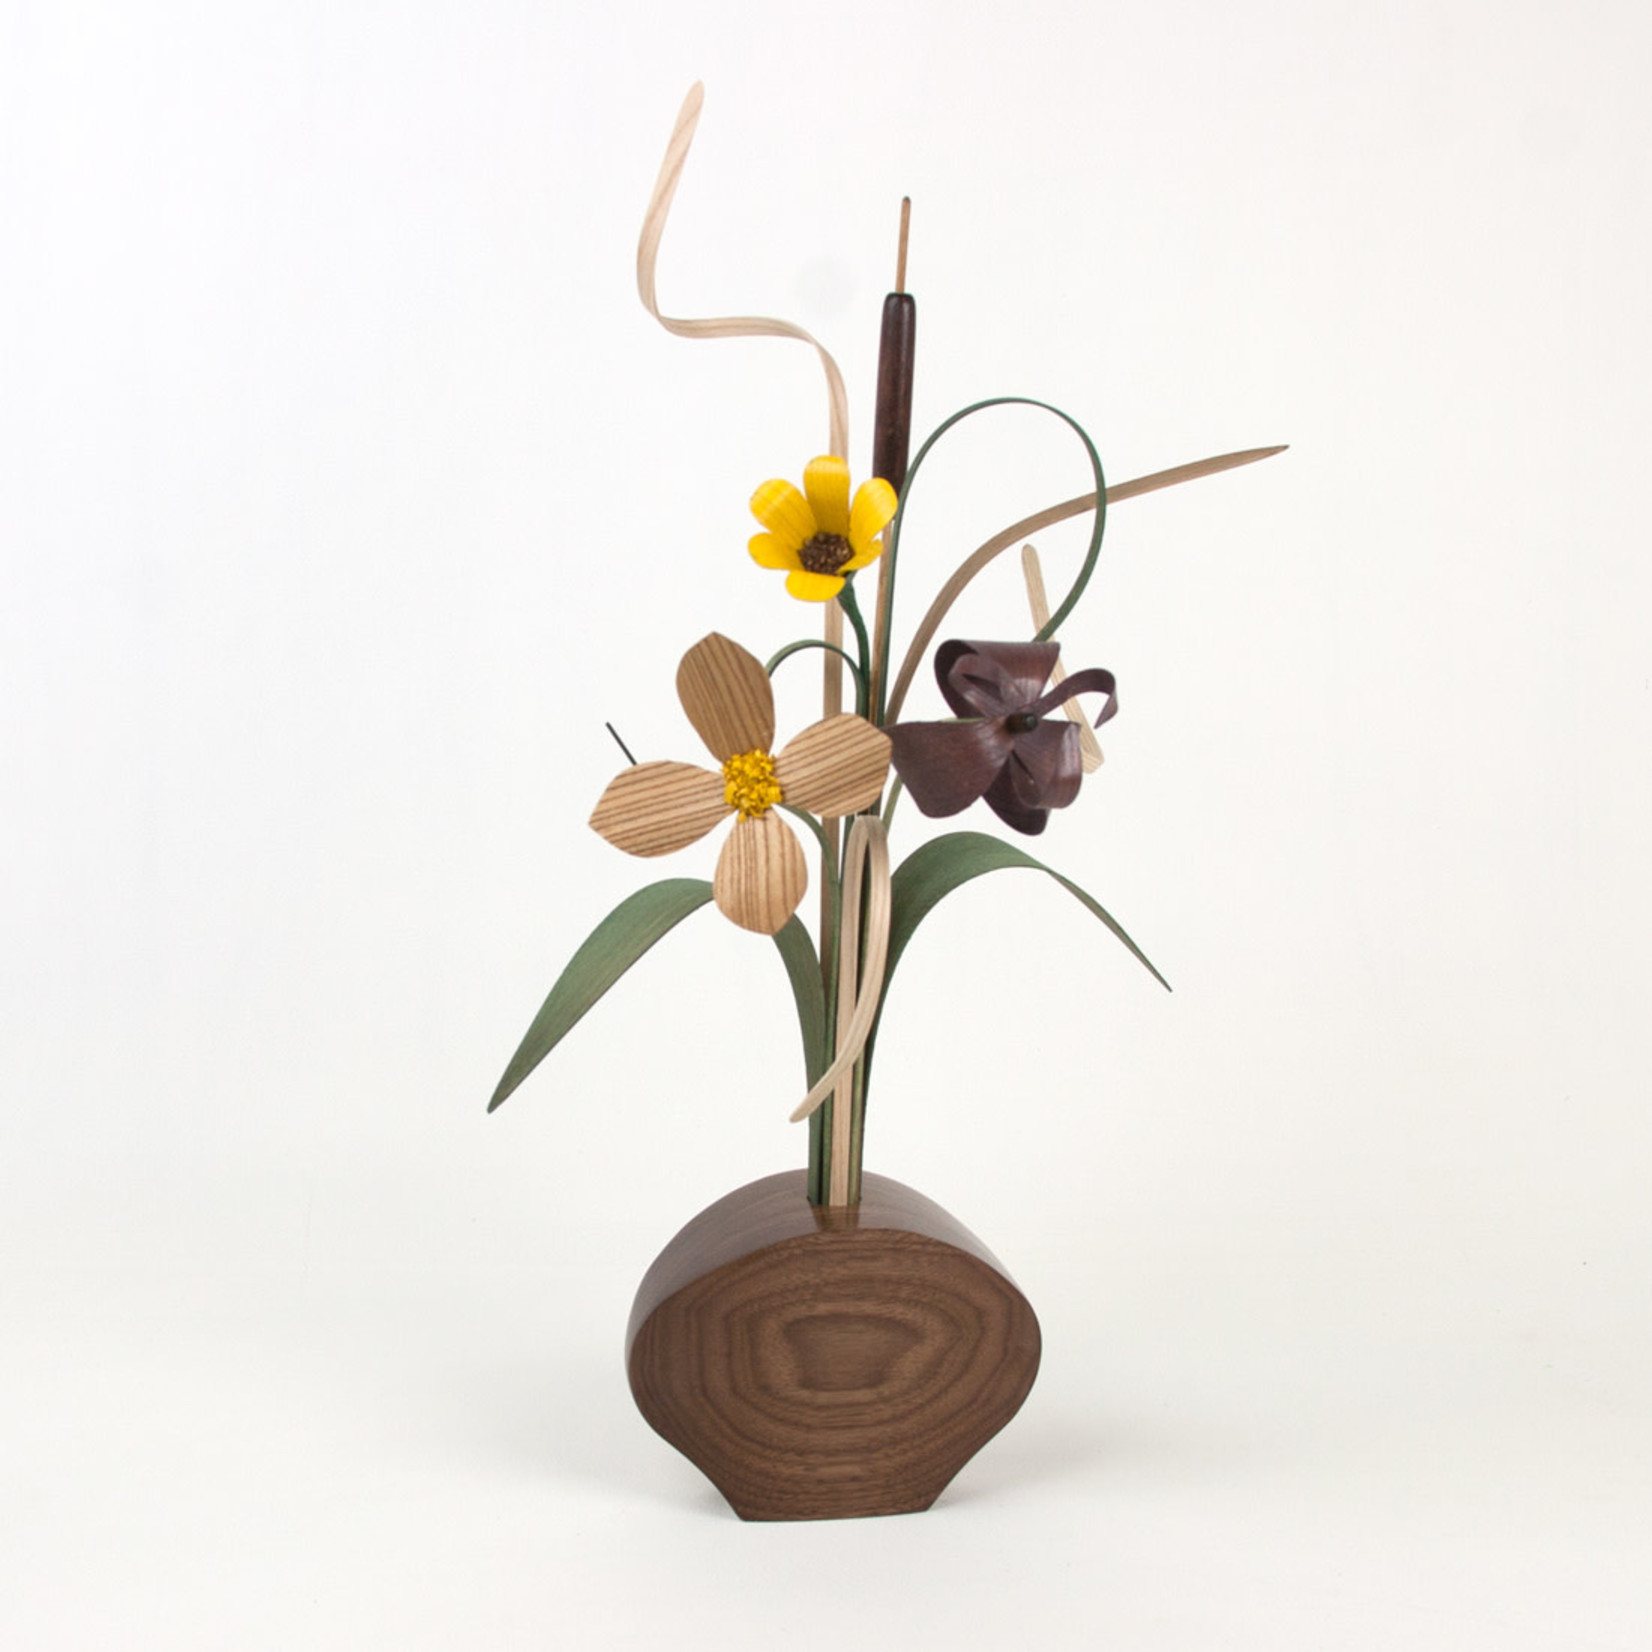 CONTEMPORARY BALANCE WOOD VASE WITH WOOD FLOWERS